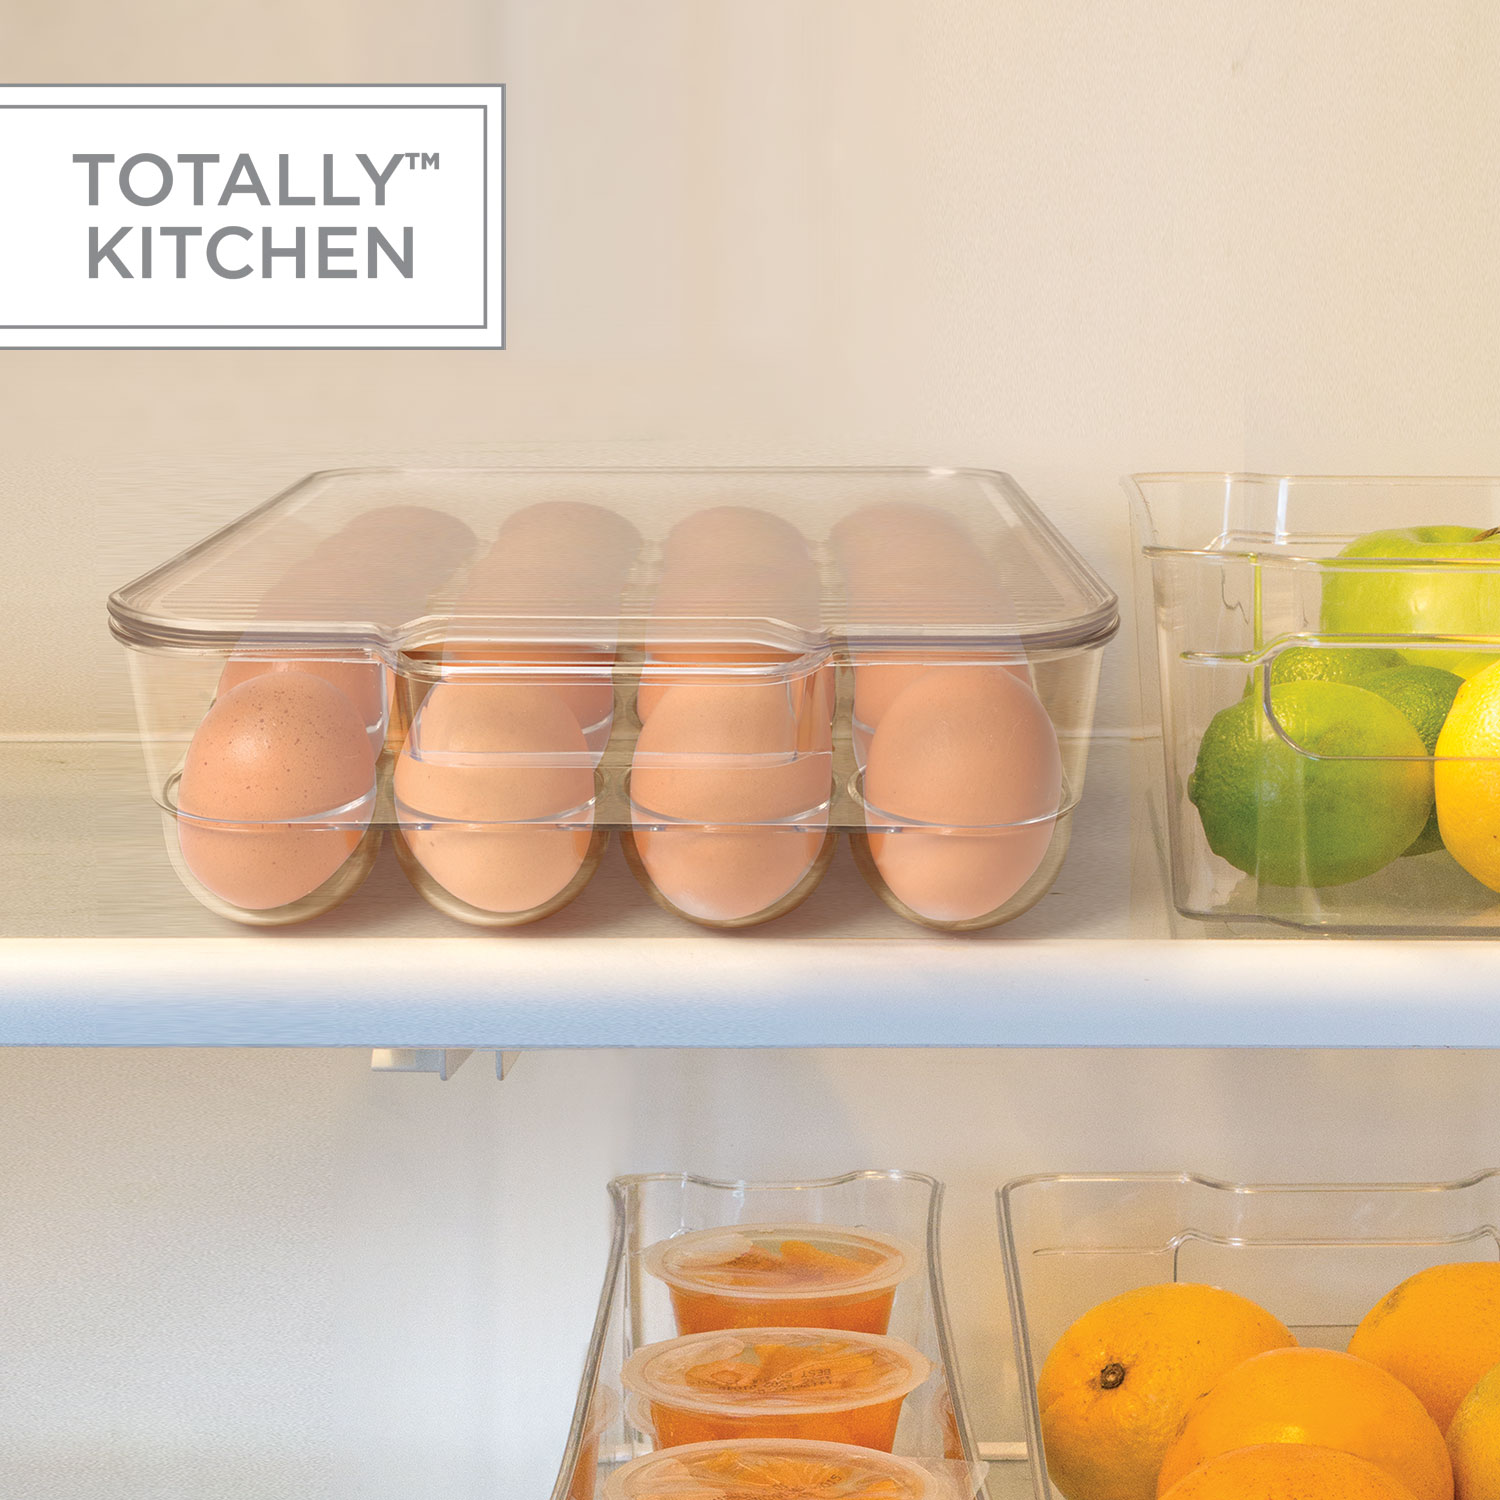 RMay Store hotumn 2 tiers deviled egg containers with lid & holder plastic  egg holders clear egg tray egg carrier fridge freezer food st